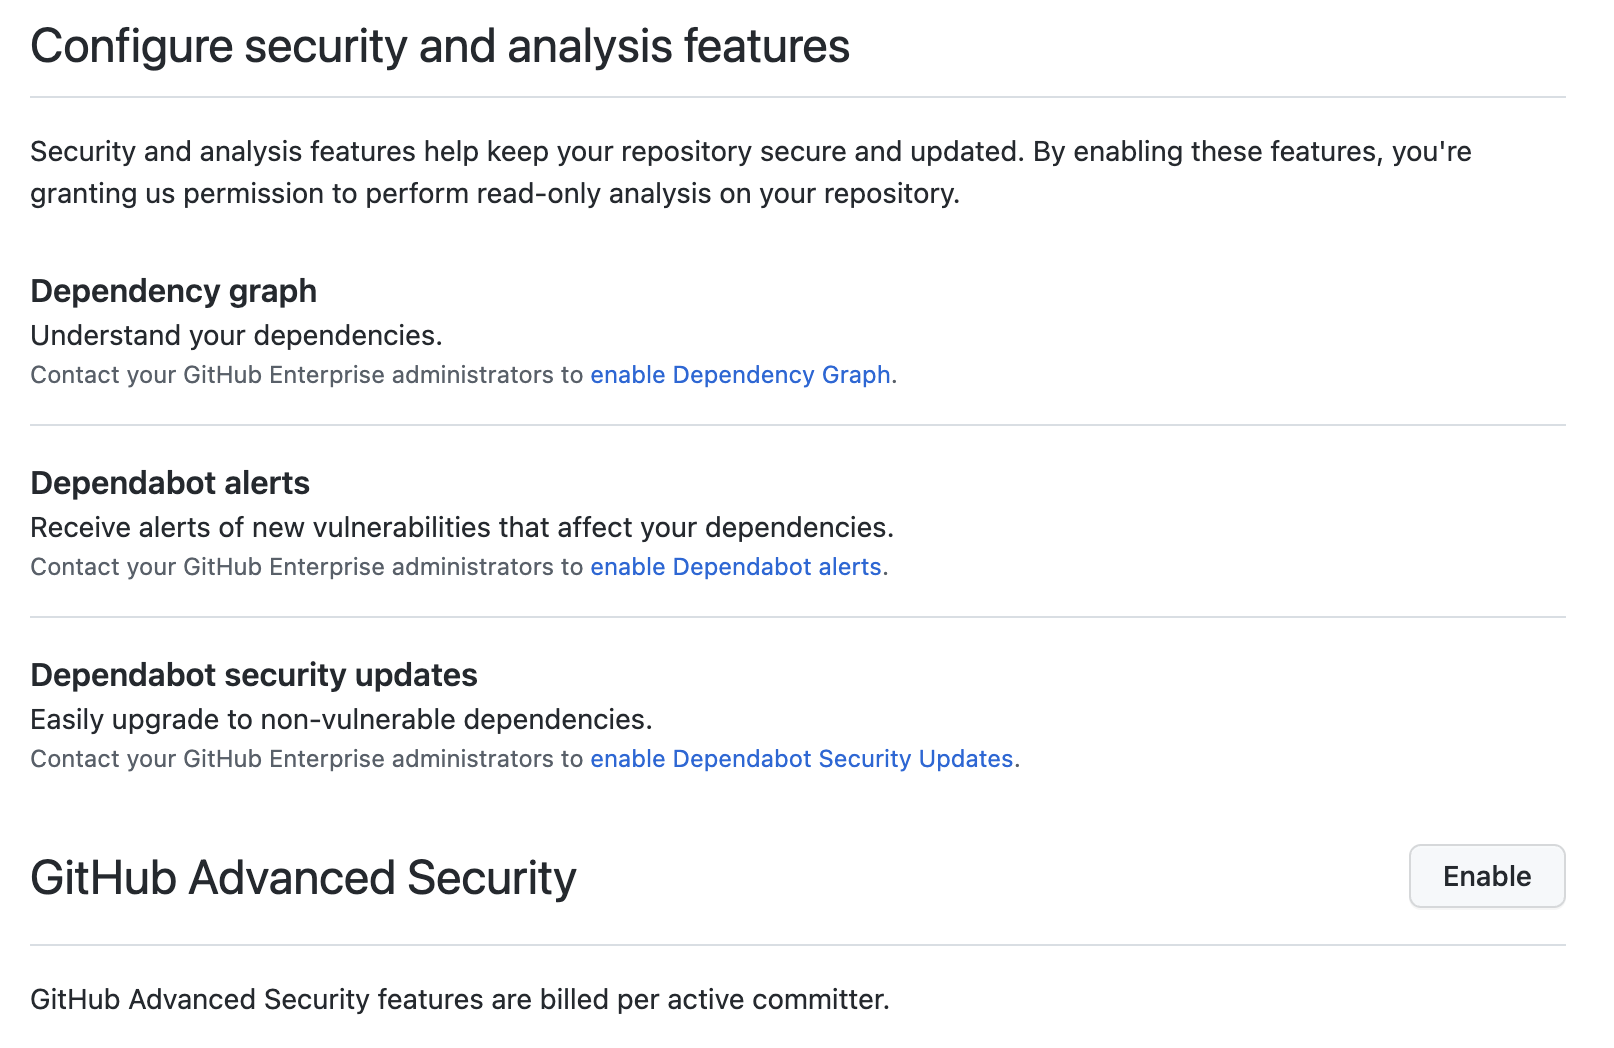 Screenshot of "Code security and analysis features".